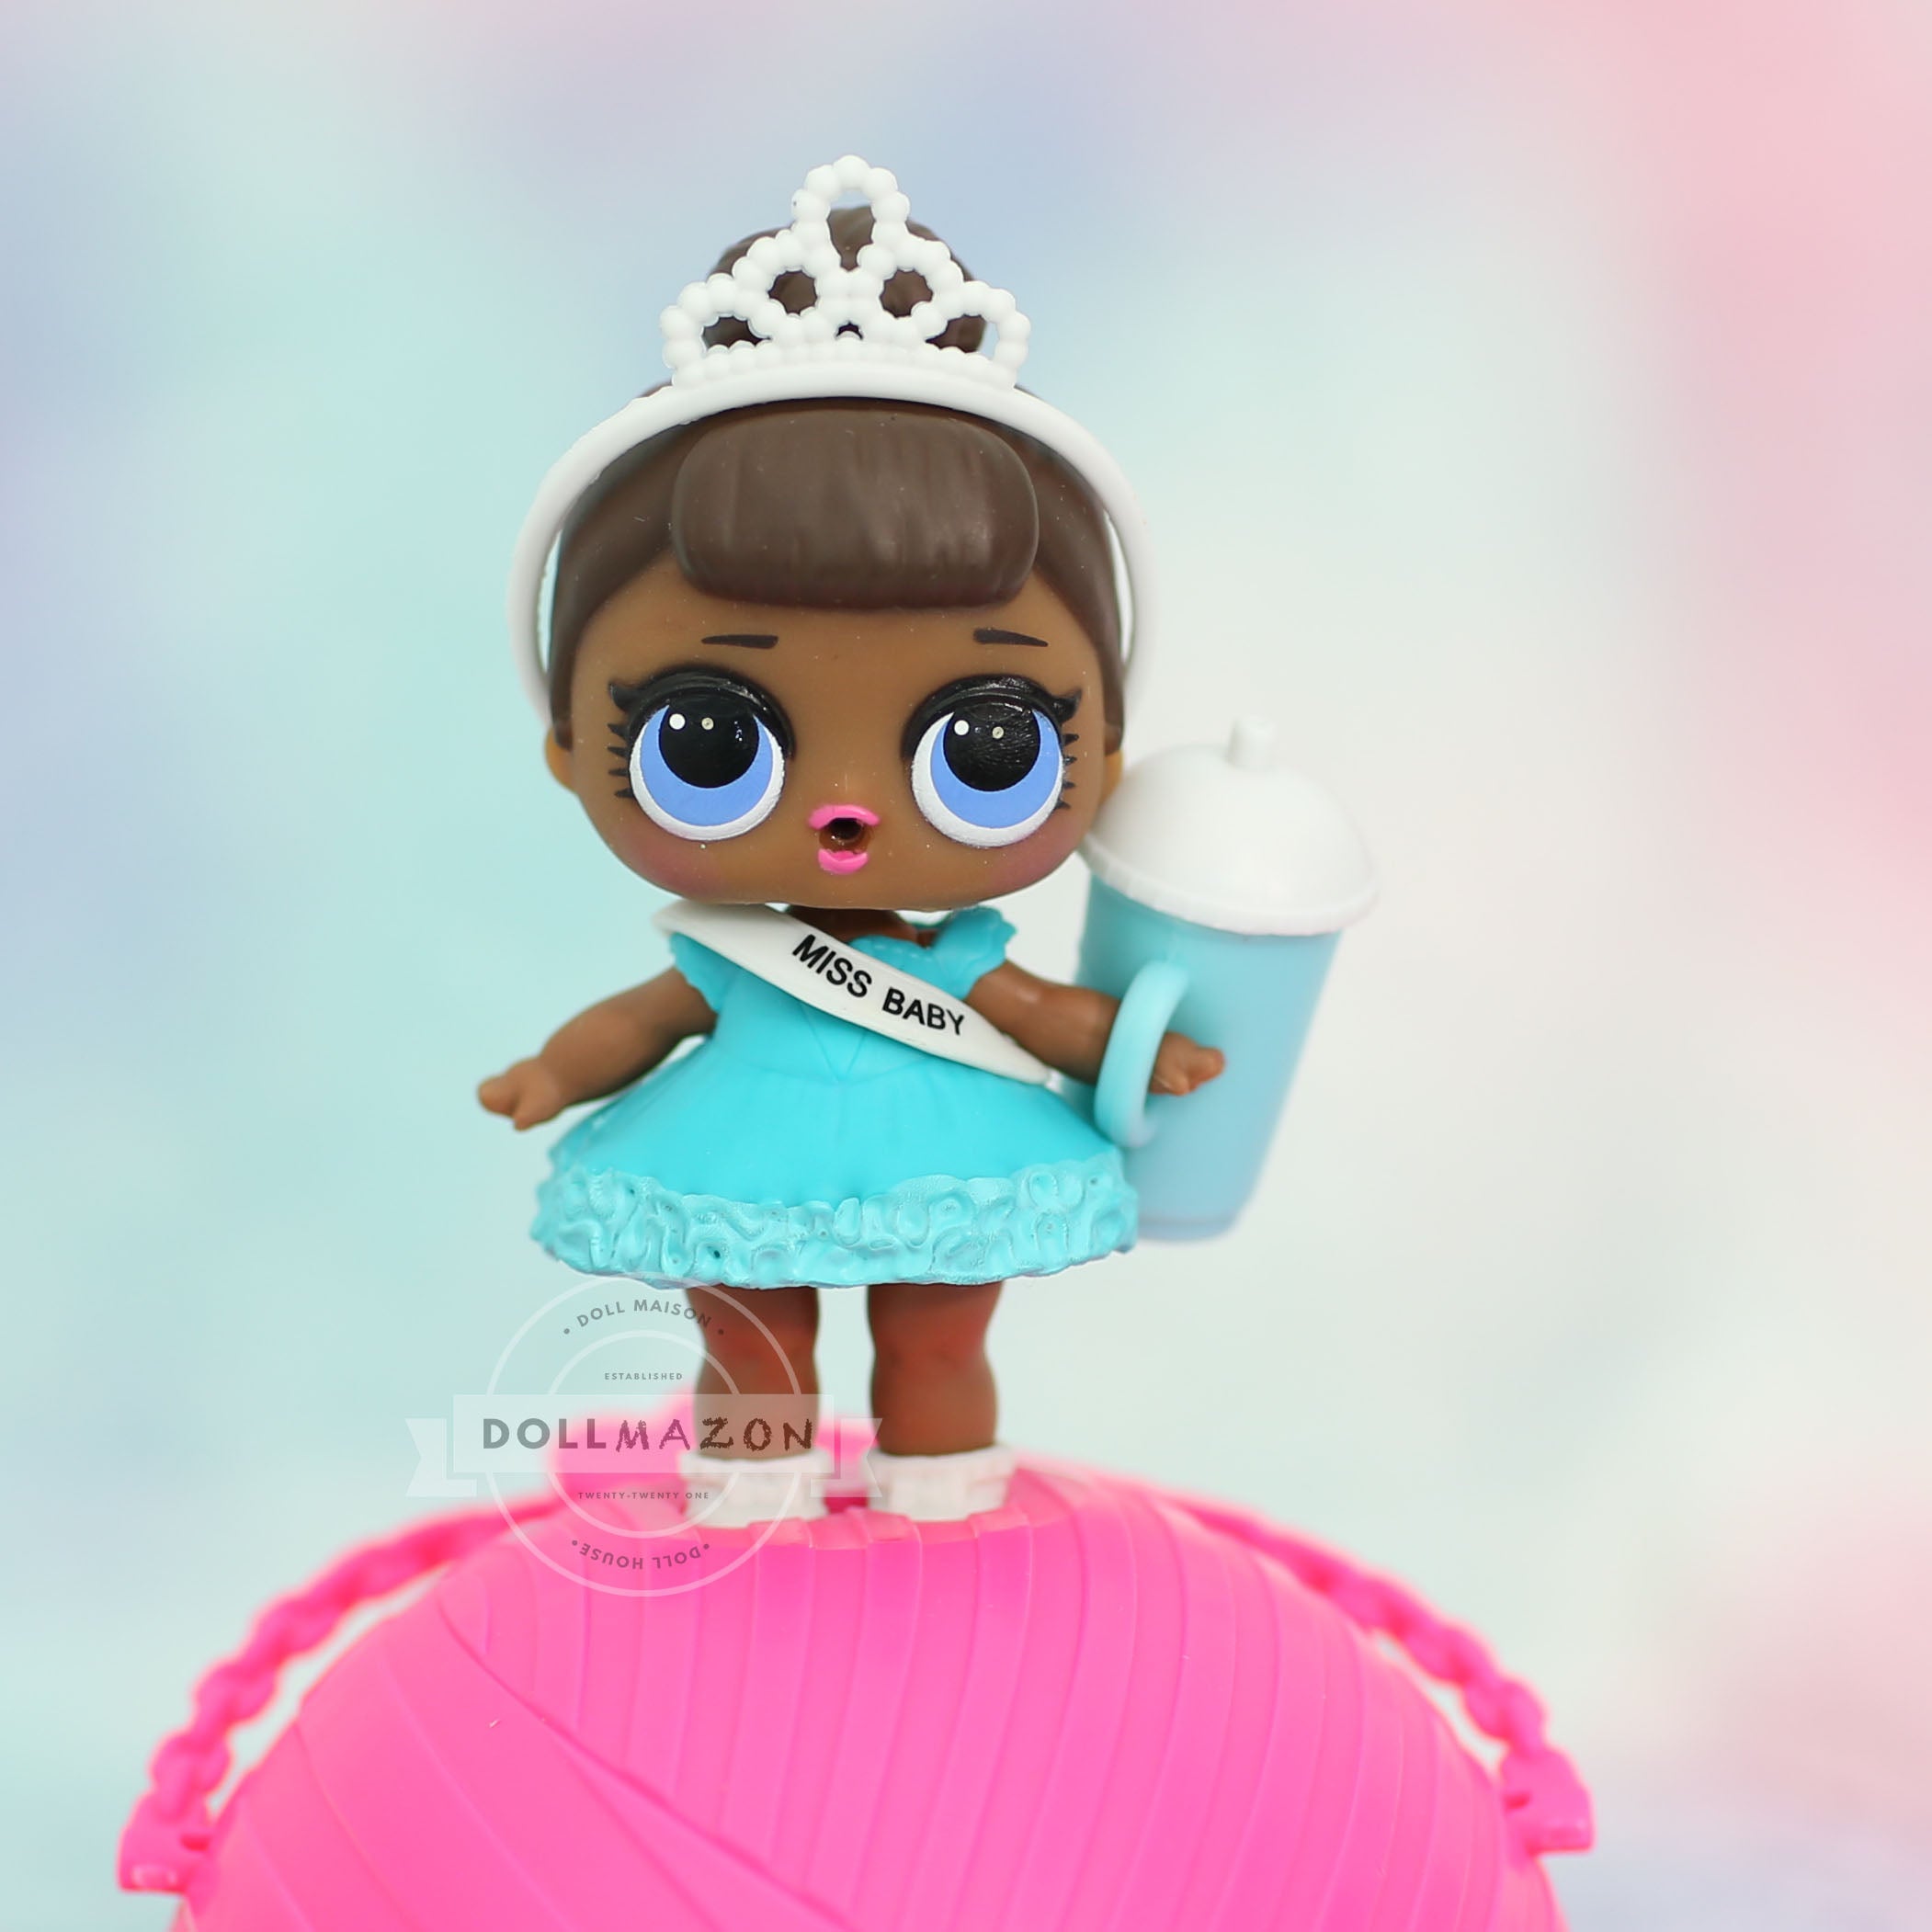 NEW LOL Surprise Dolls Series 1 Re Release Miss Baby Opened